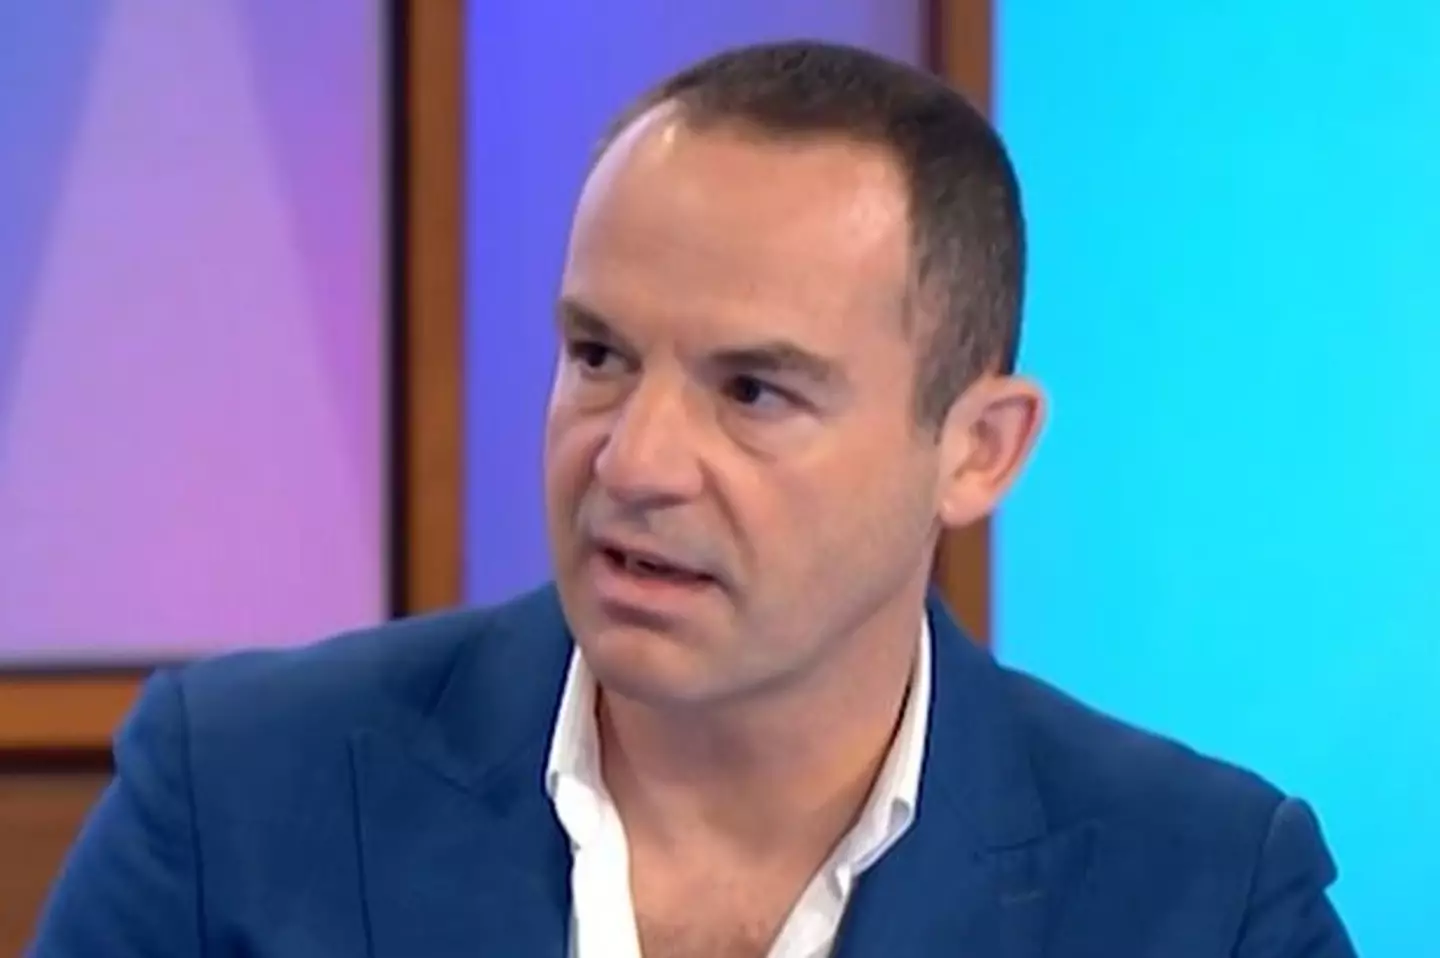 Martin Lewis was forced to delete his tweet.